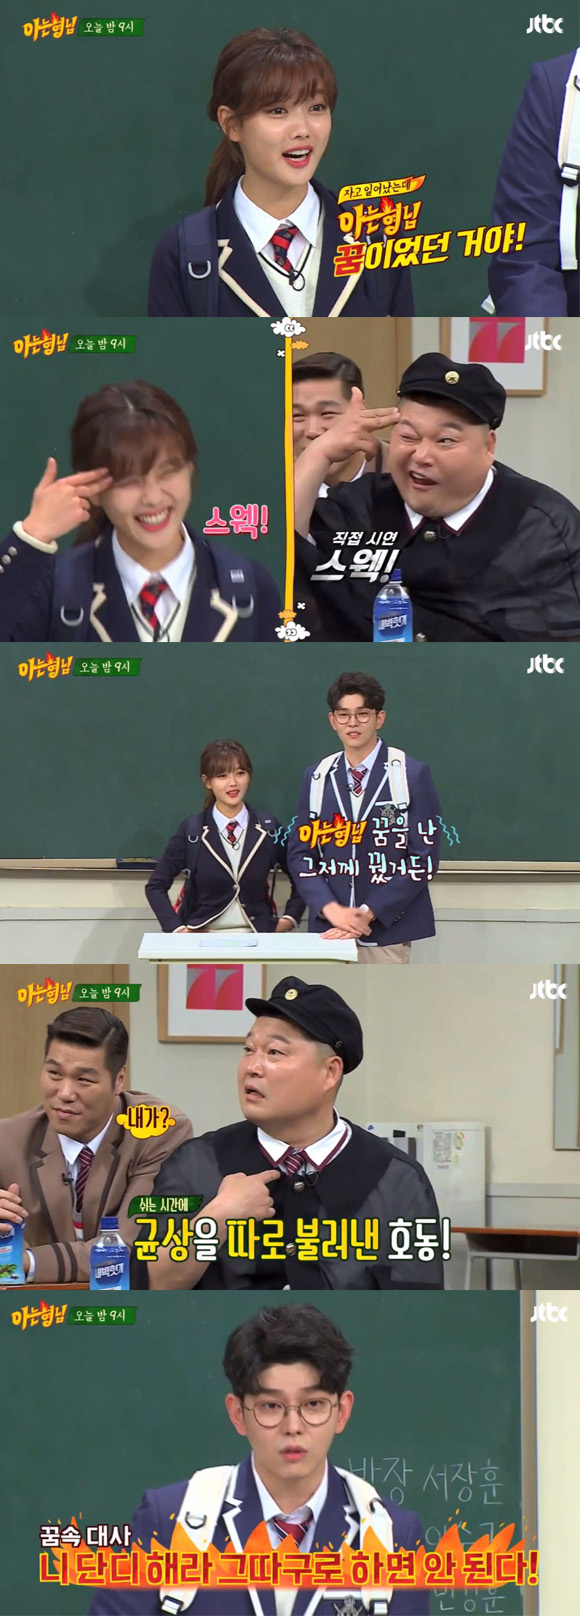 Kim Yoo-jung and Yoon Kyun-sang, who are known as knowing brothers, caught the eye by saying that they had dreamed about Kang Ho-dong.On the 24th, JTBC entertainment program Knowing Brother pre-released a video titled Yoon Kyun-sang (wrinkle__), which is compared to Yoo Jung-yi, a VIP listener who knows his brother.The video showed Actors Kim Yoo-jung and Yoon Kyun-sang appearing in JTBCs new monthly drama Clean Up Once Hot.On the same day, Kim Yoo-jung expressed his unusual affection for the program, saying, I remember the contents of the first episode of Knowing Brother. Kim Yoo-jung said, If I do not see the original entertainment,Thats my brother, I know.Kim Yoo-jung said, One day I dreamed of knowing brother. Suddenly Kang Ho-dong came to my front of my dream and pushed his face in front of me at that time.I really liked it, so I dreamed it and felt so good.Following Kim Yoo-jungs episode, Yoon Kyun-sang also said, I dreamed of knowing brother. Yoon Kyun-sang said, I fell asleep when I saw Super Junior 100 times.I was standing at the recording site, but there was no Yu-Jeong, and my story was not so funny in the dream atmosphere. Then suddenly Kang Ho-dong called me separately and said, Do your Dandy.You cant do that, he said.Kim said, This is not a dream, but a dream. It can be like that today.Meanwhile, JTBCs Knowing Brother will be broadcast at 9 p.m. on the 24th.Photo: JTBC captures broadcasts of Knowing Brother